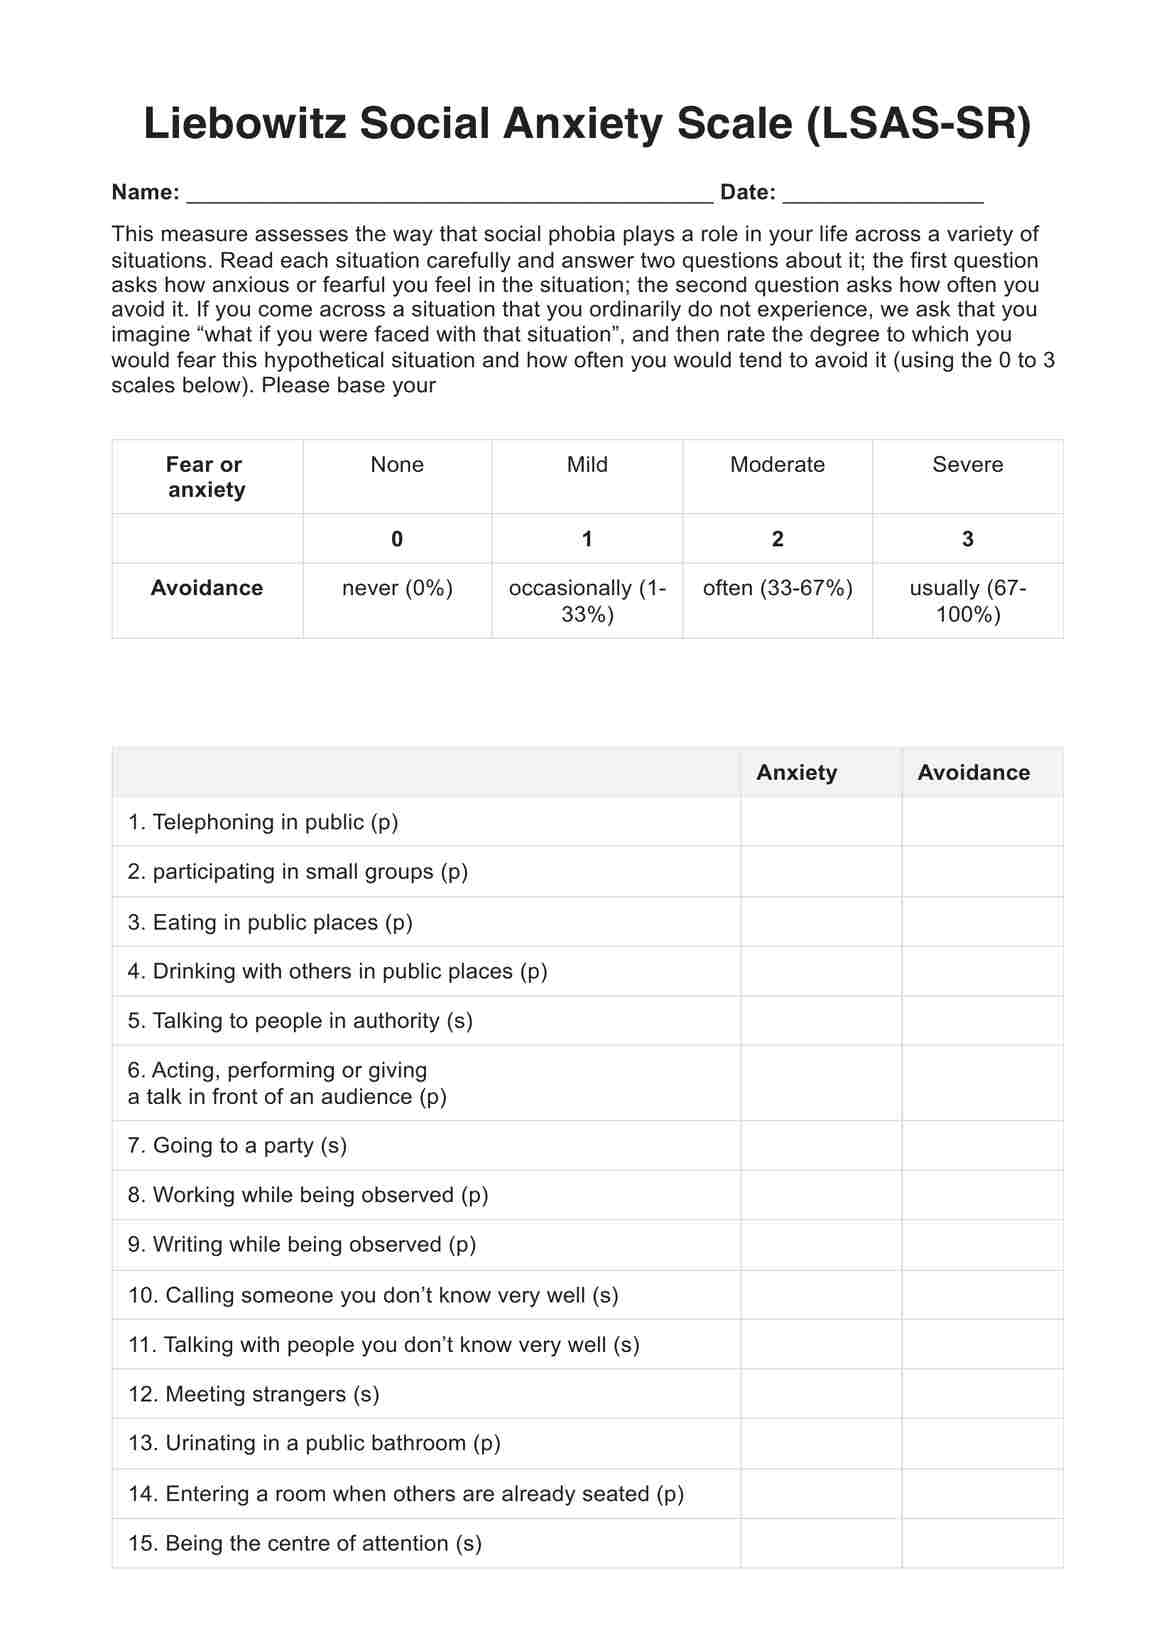 Liebowitz Social Anxiety Scale PDF Example